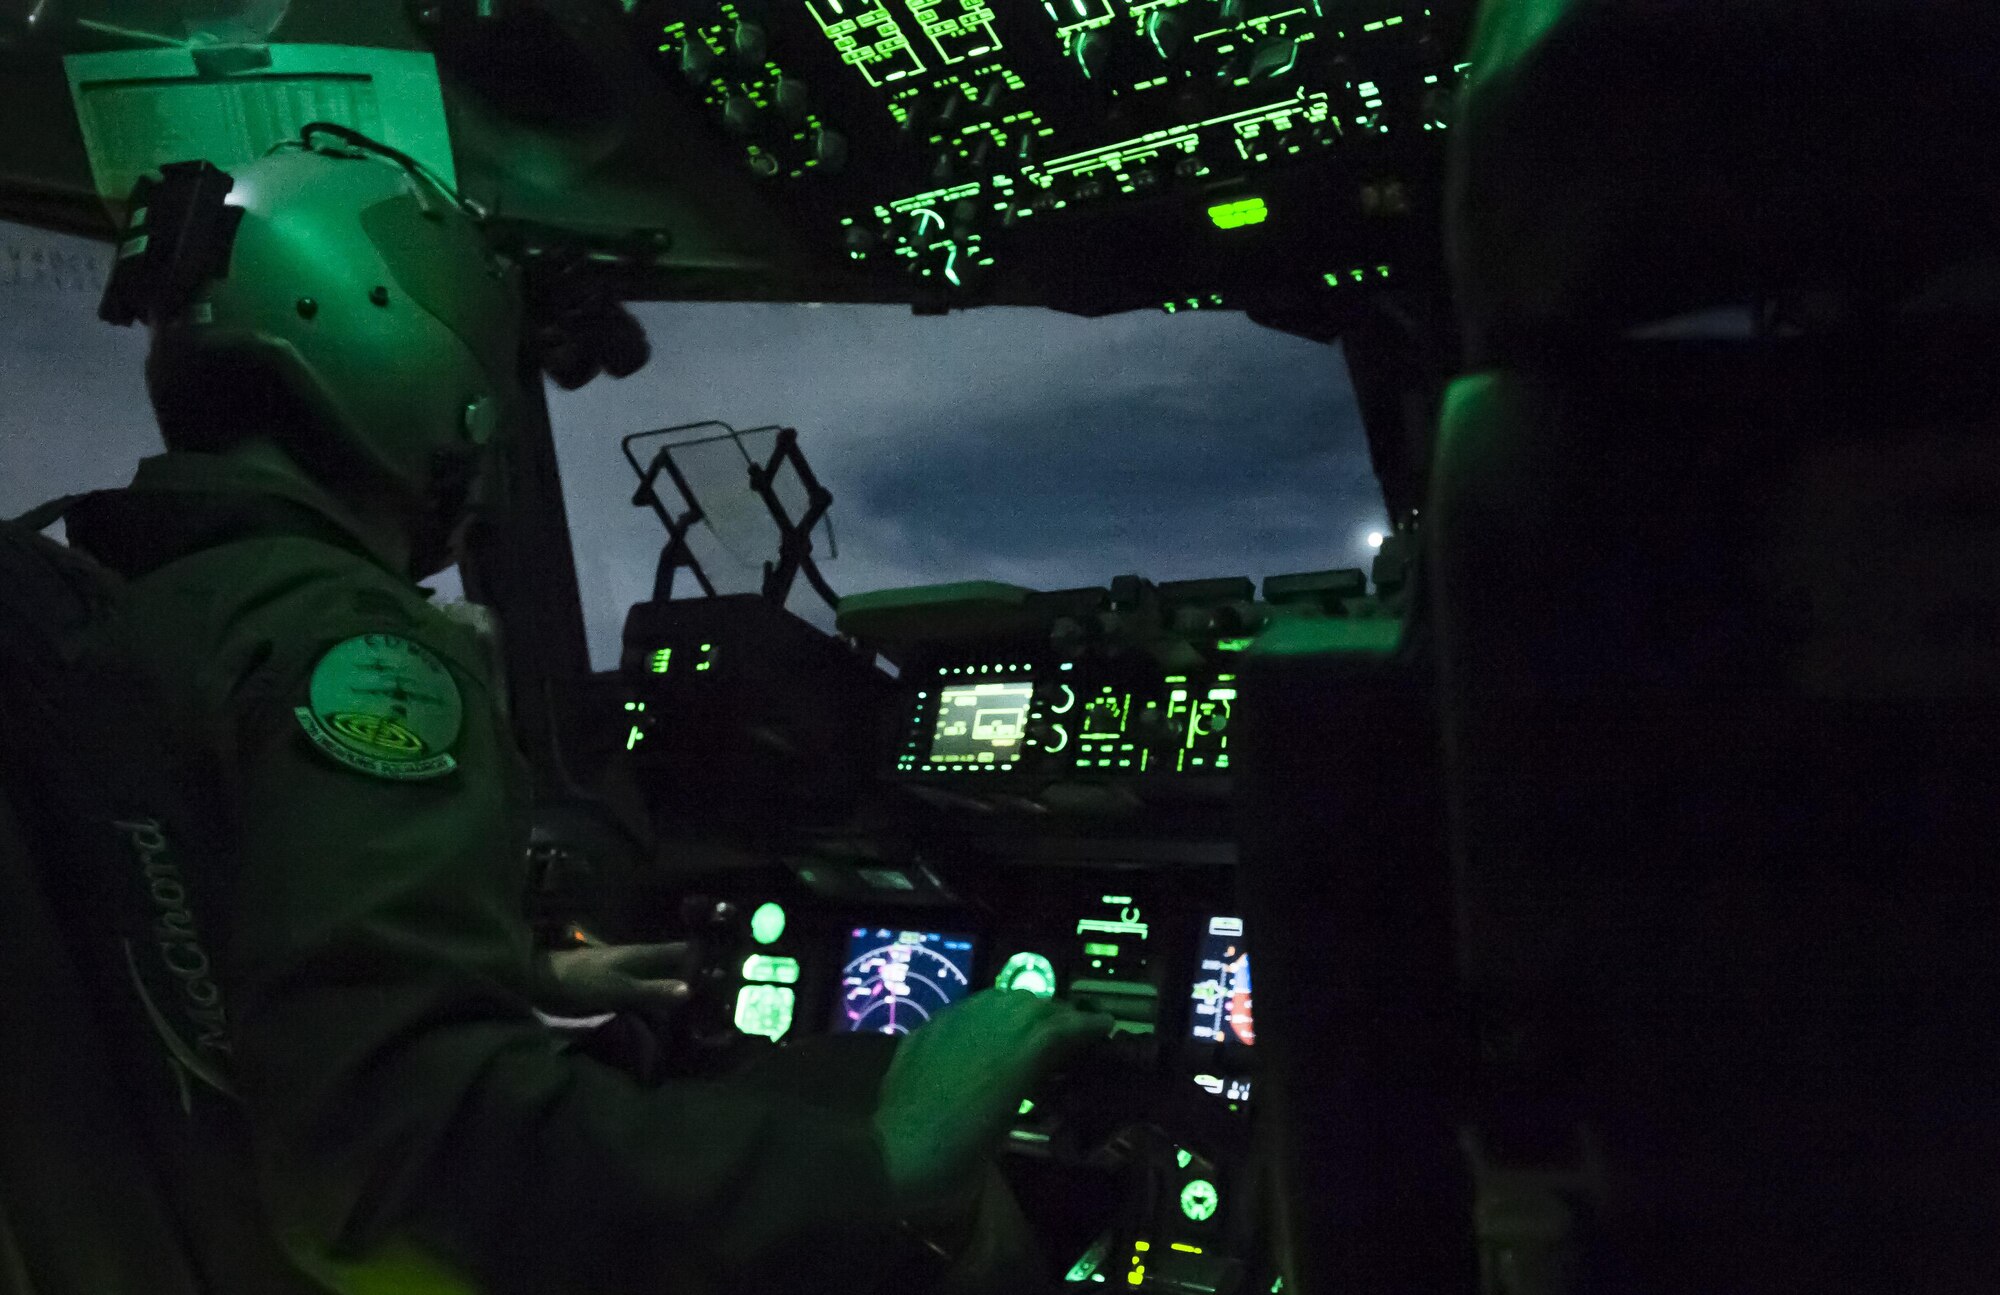 Capt. Mike “Havac” Gilpatrick, a pilot assigned to the 9th Airlift Squadron, flies a C-17 Globemaster III at night during a joint forcible entry exercise over the Nevada Test and Training Range, Dec. 10, 2016. Joint service exercises like the JFEX are integral to maintaining operational cohesiveness between the Air Force and the Army. (U.S. Air Force photo by Airman 1st Class Kevin Tanenbaum)